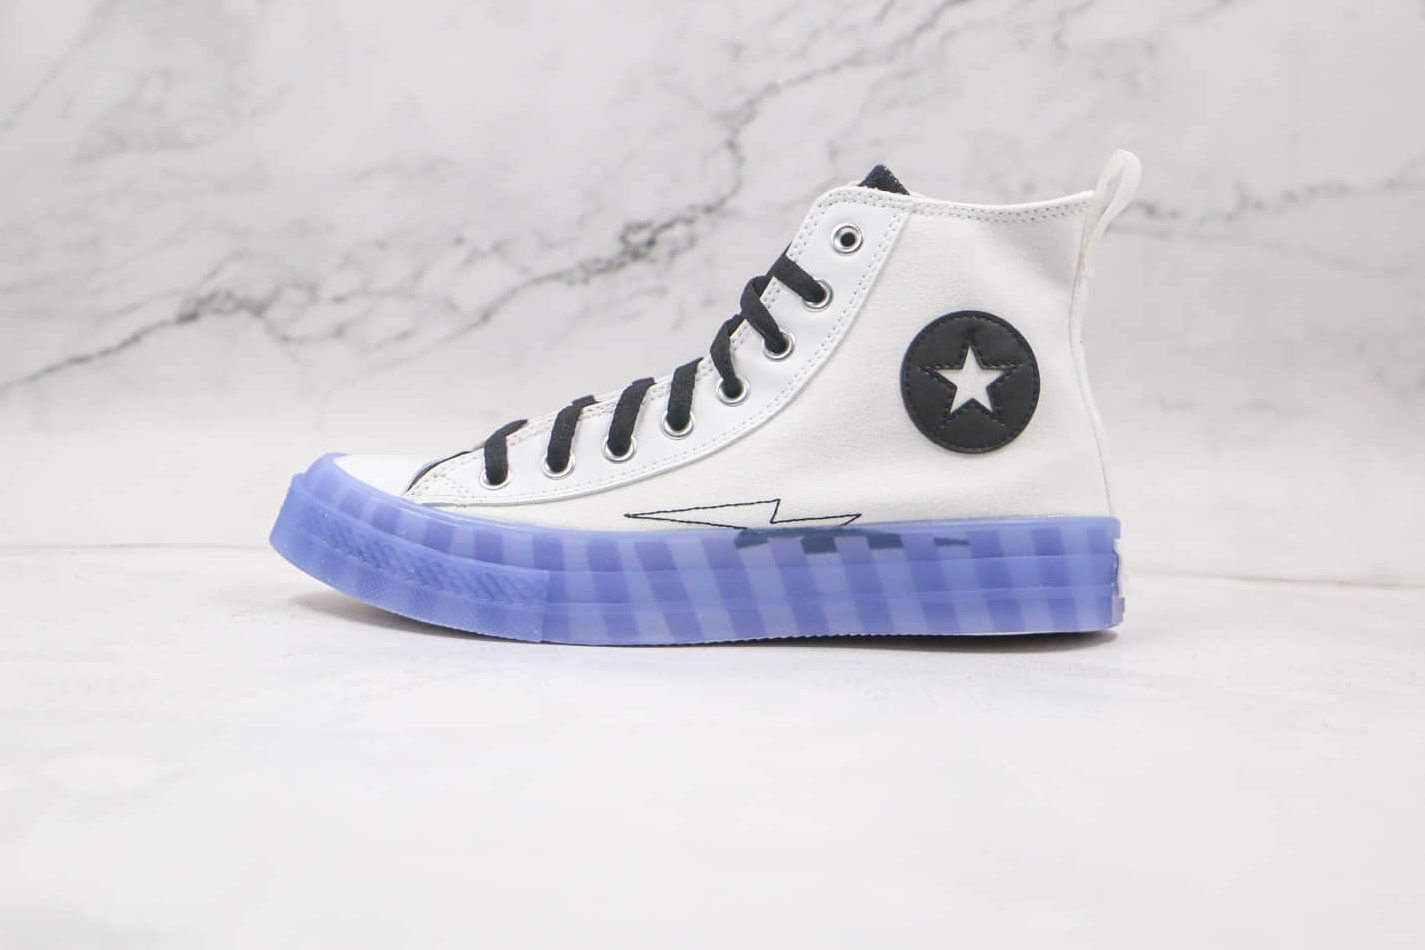 Converse UNT1TL3D High 'Not a Chuck - White' 169468C - Affordable urban style sneakers